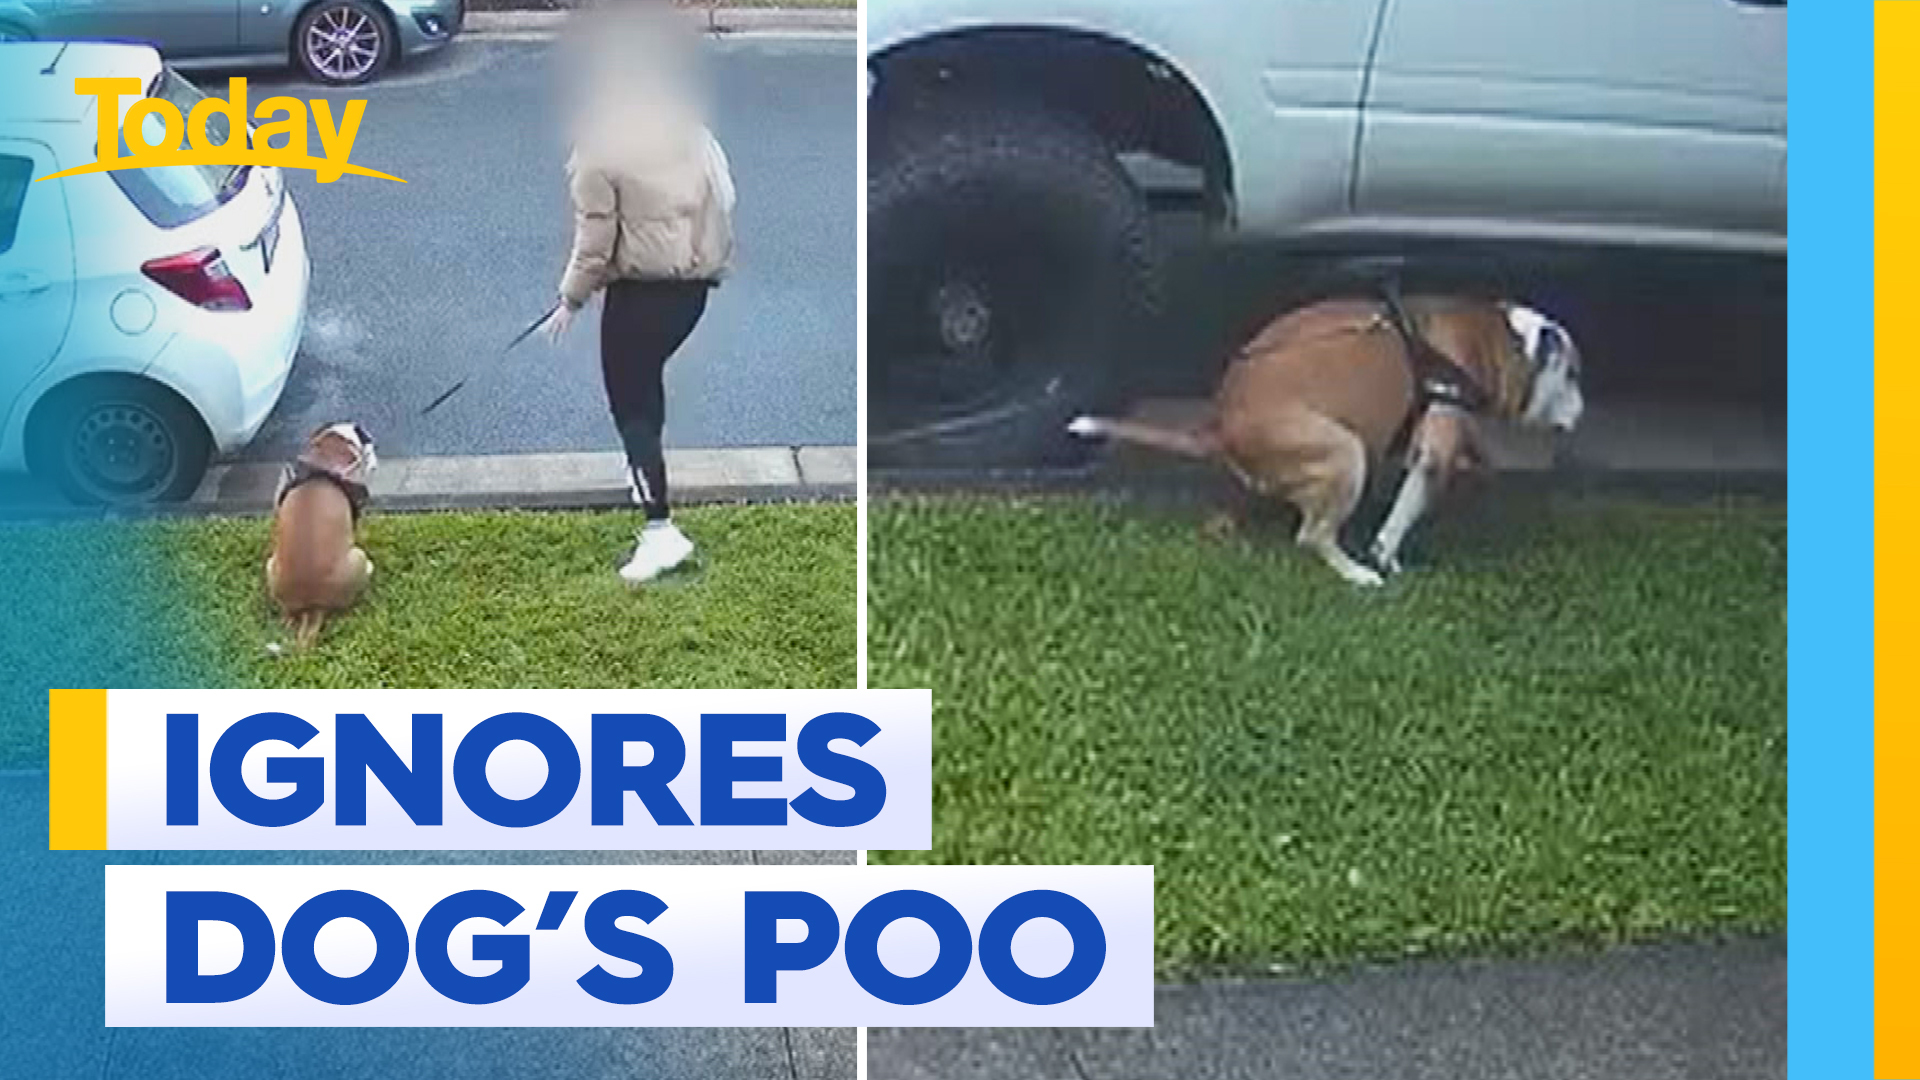 Queensland woman caught on camera not picking up her dog's poo